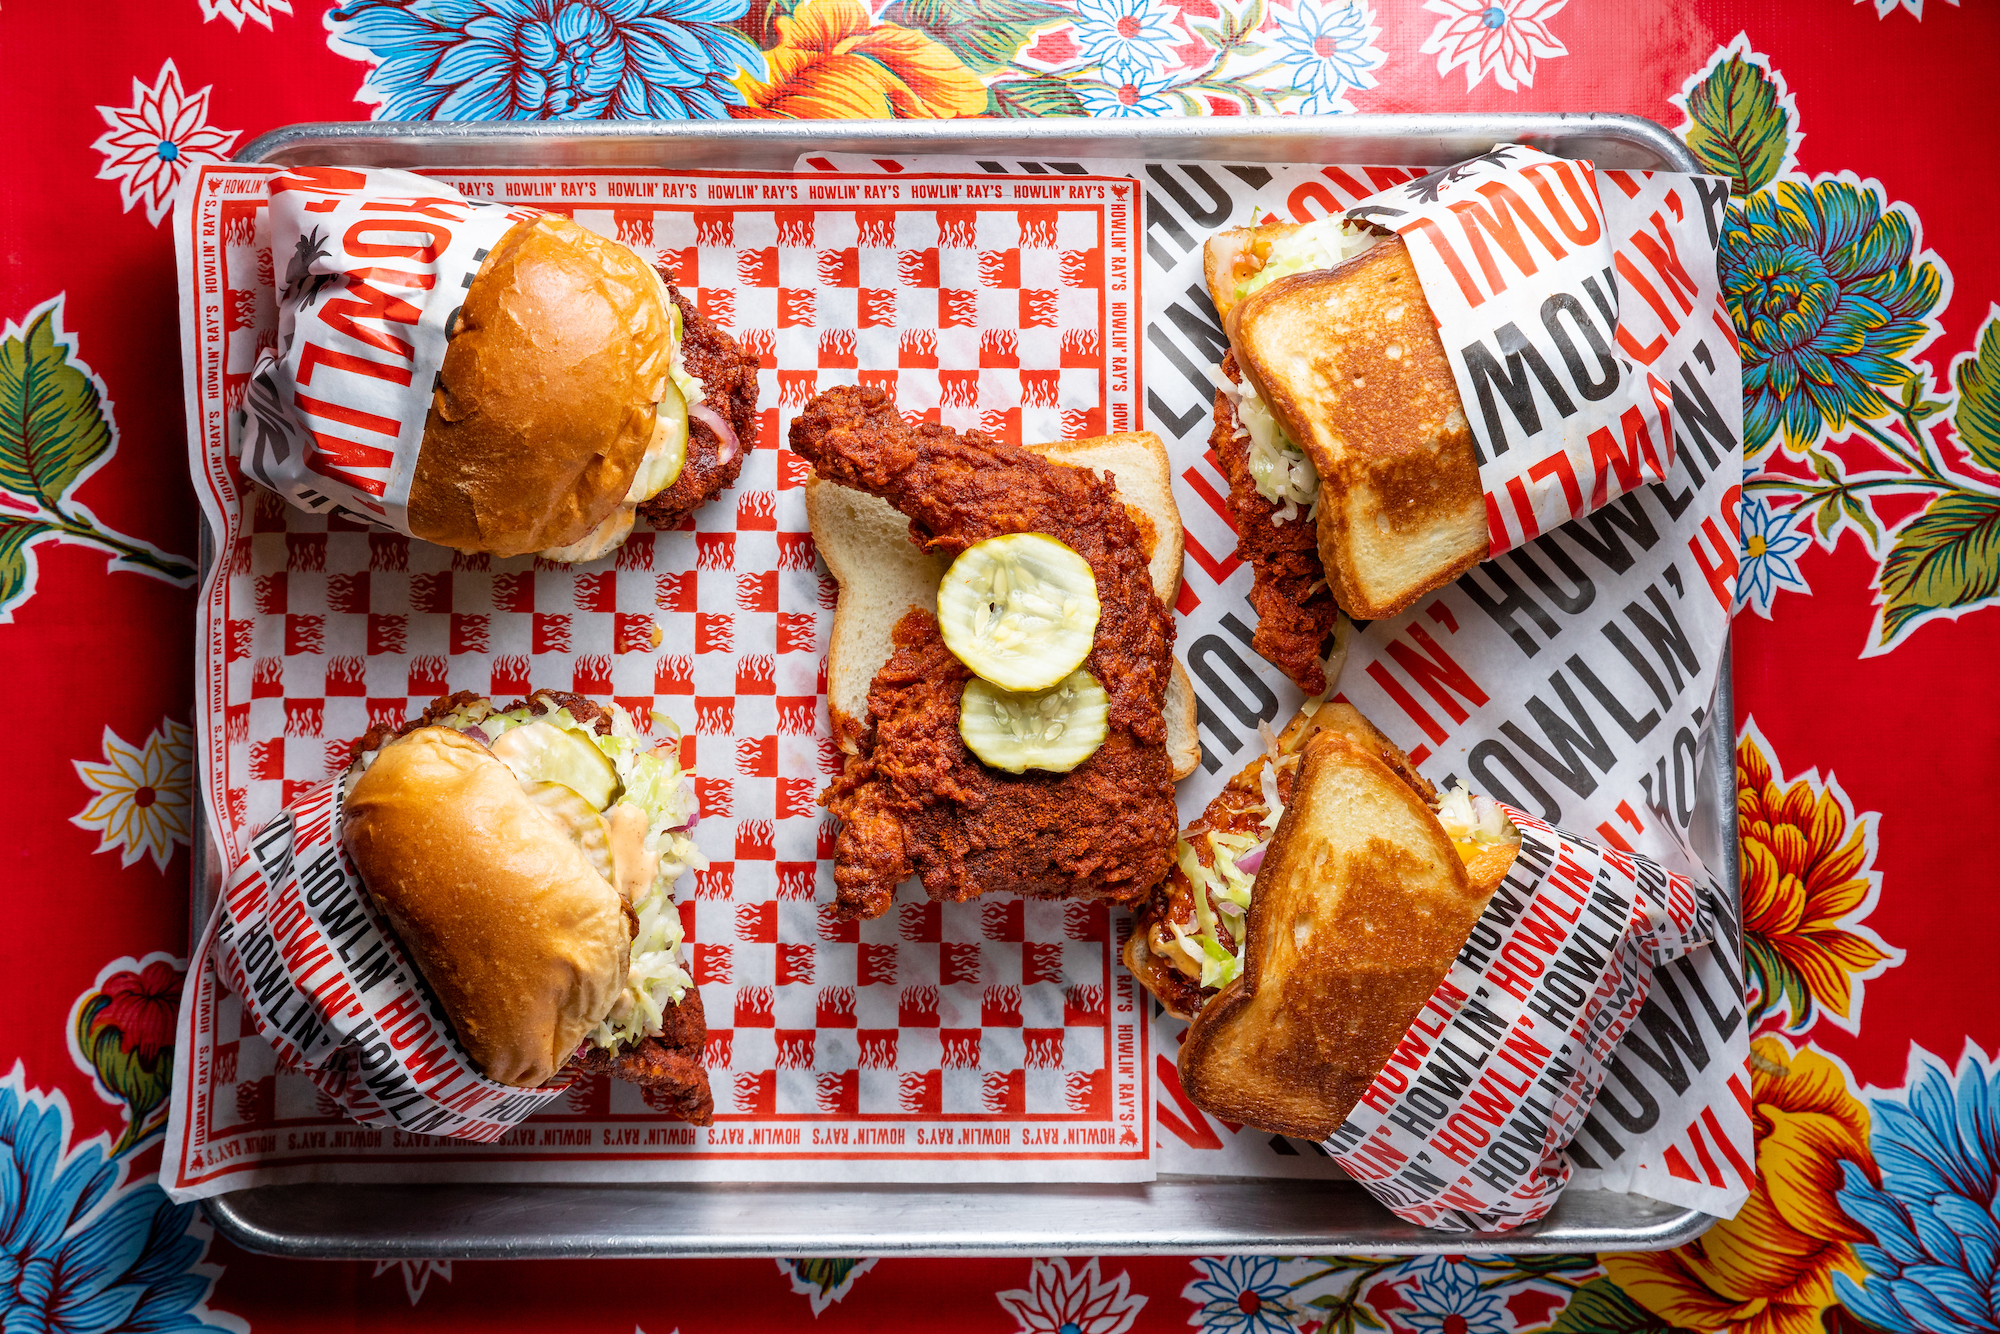 A tray of hot chicken shown from above with checkered paper beneath.